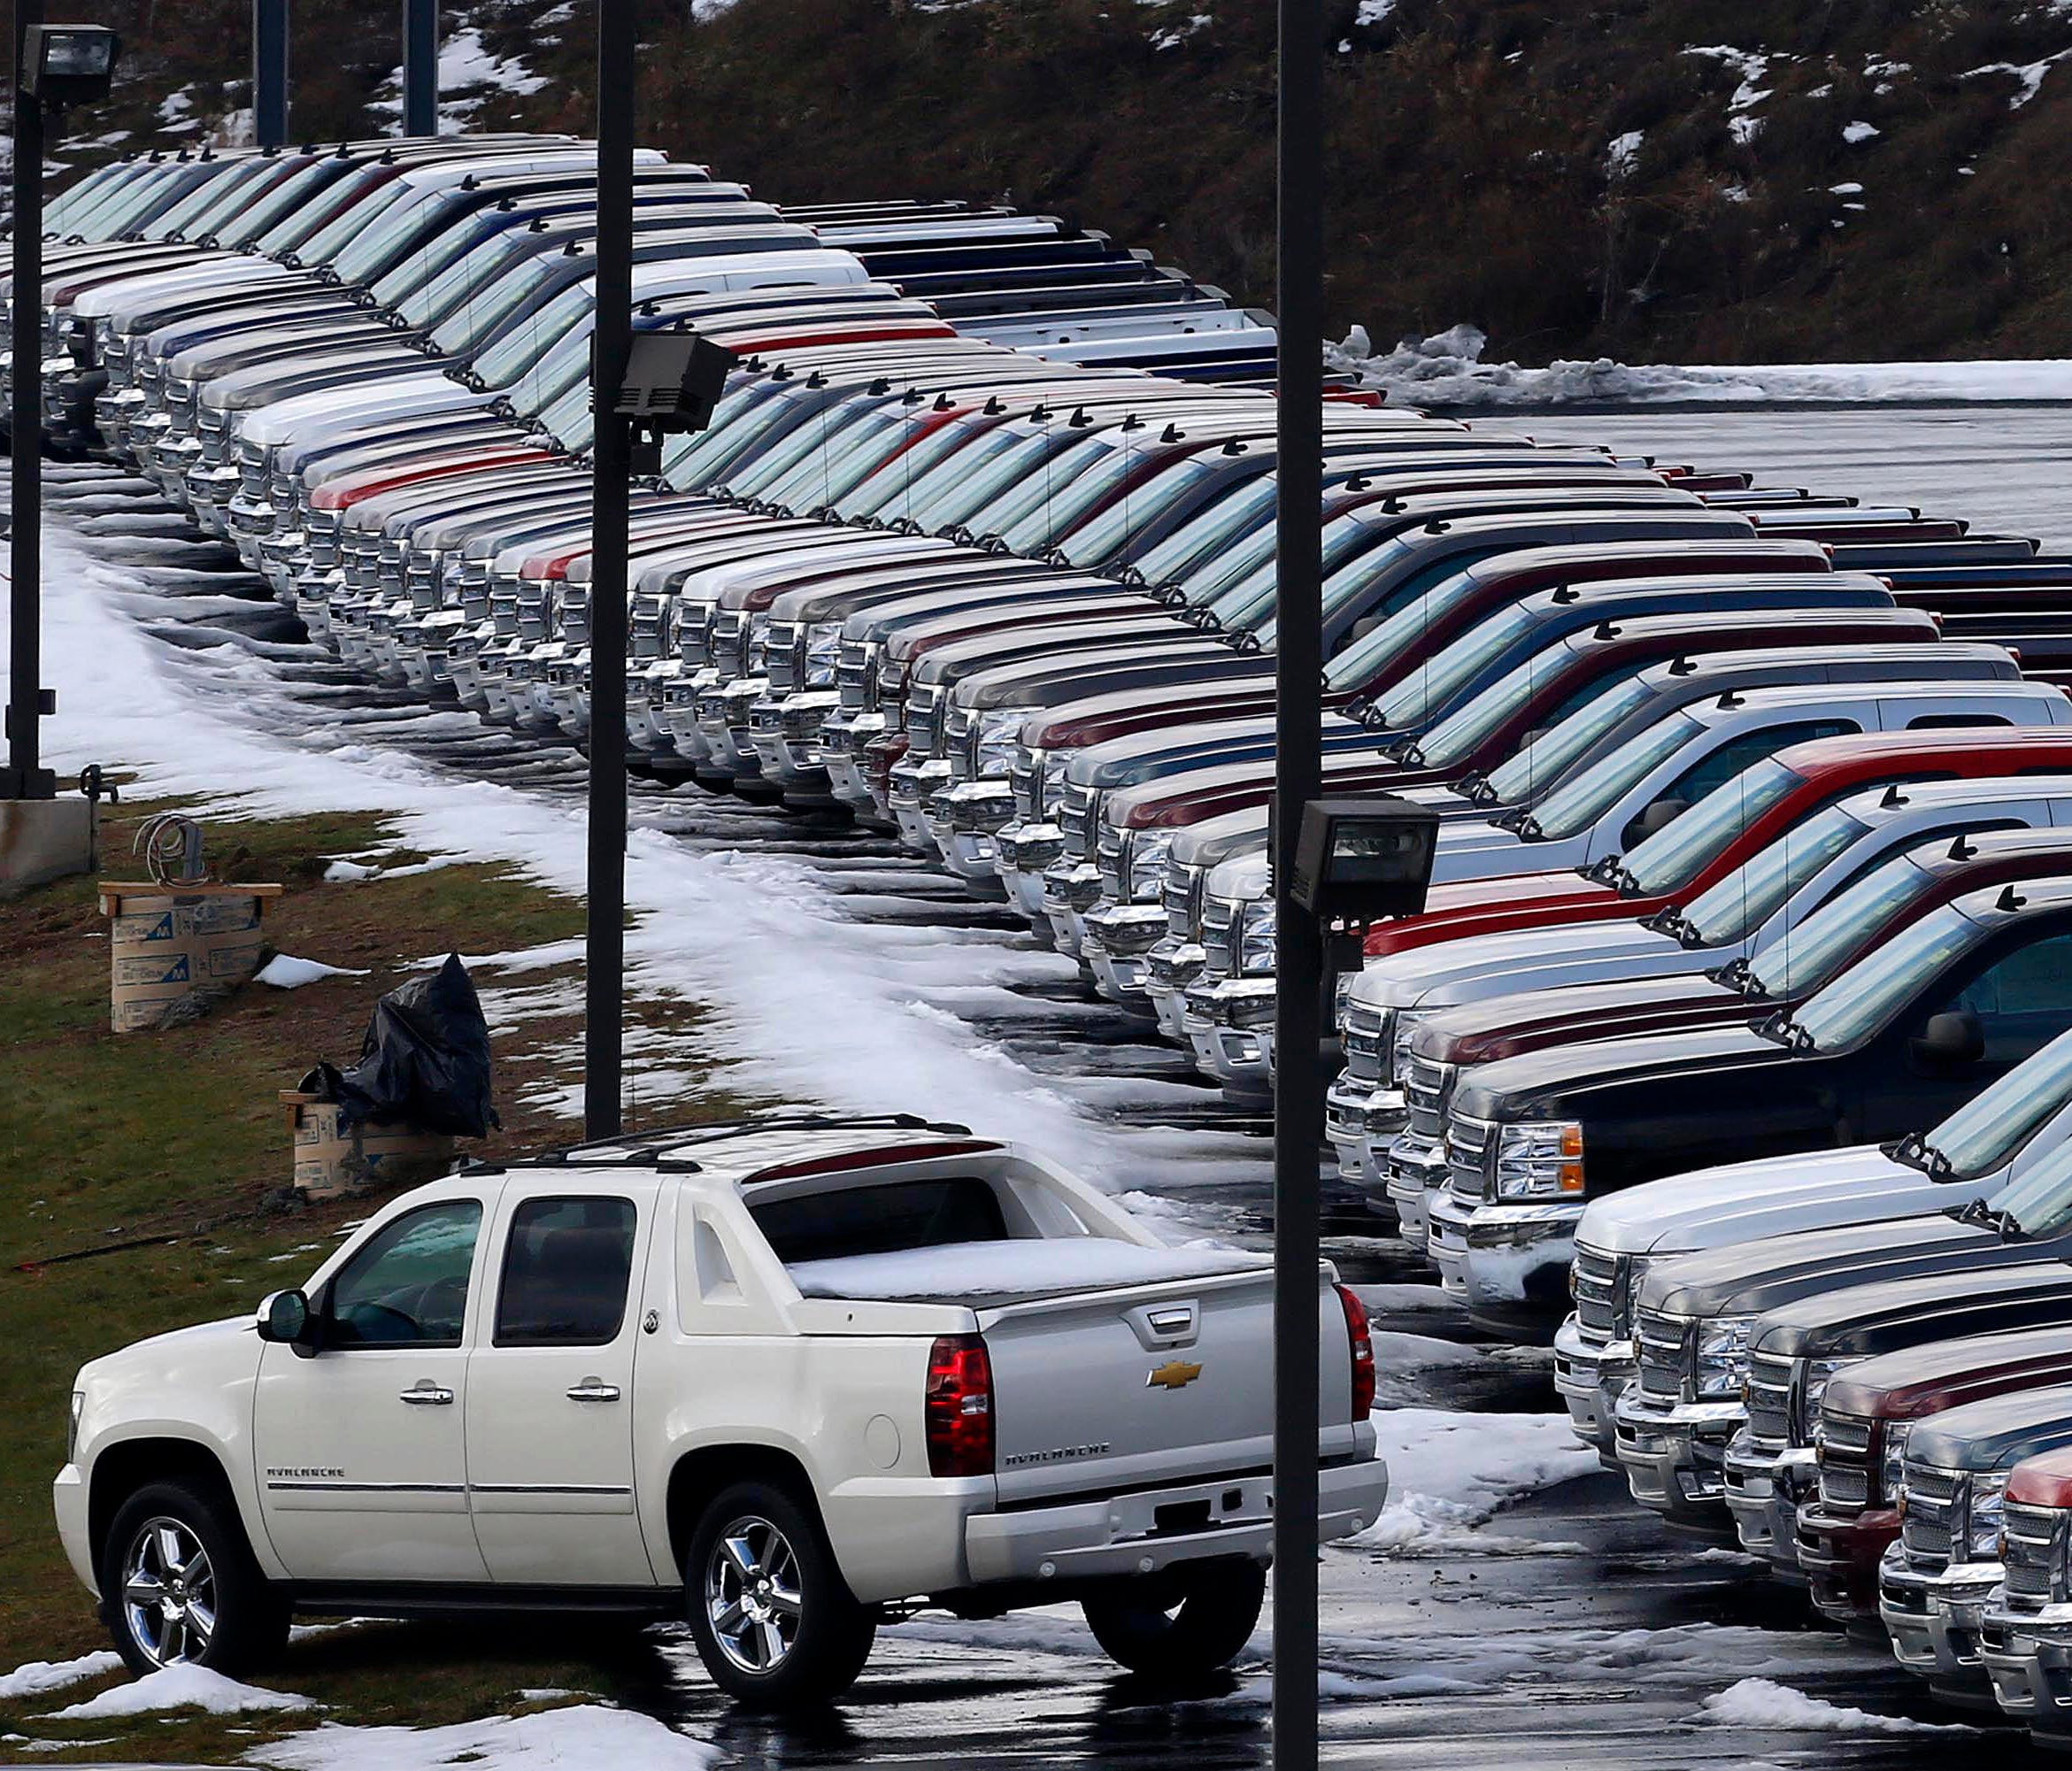 Chevy trucks line the lot of a dealer in Murrysville, Pa. , in this 2013 file photo